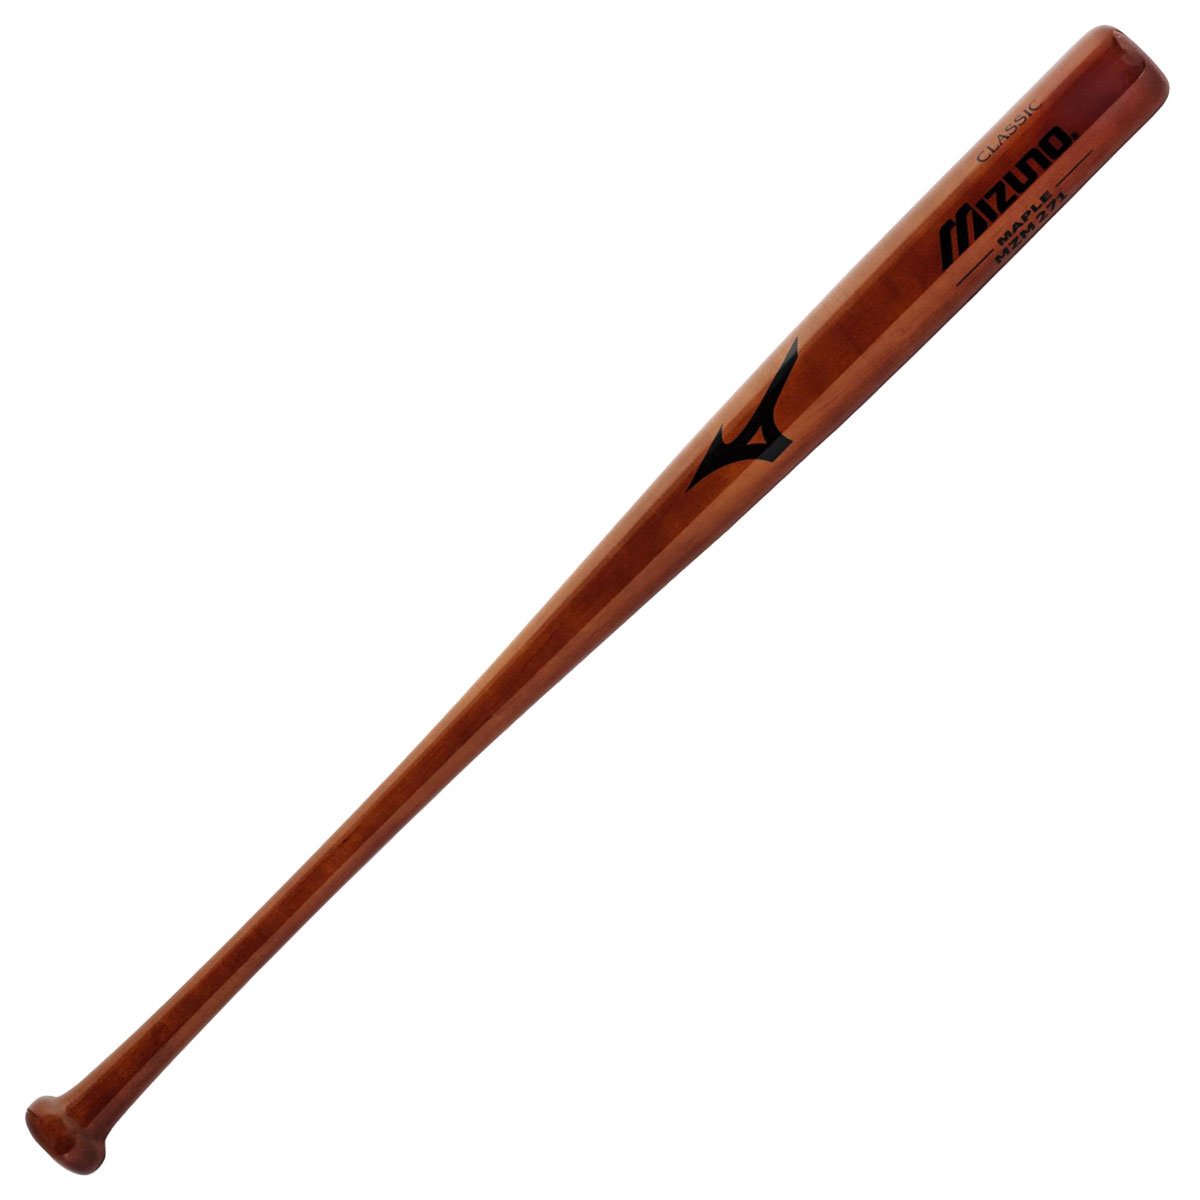 Hard Maple Hand selected wood from premium maple wood.Cupped for balanced swing weight and 2.25 Barrel Diameter approved for Little League play. Little League version of bat used by MLB pros